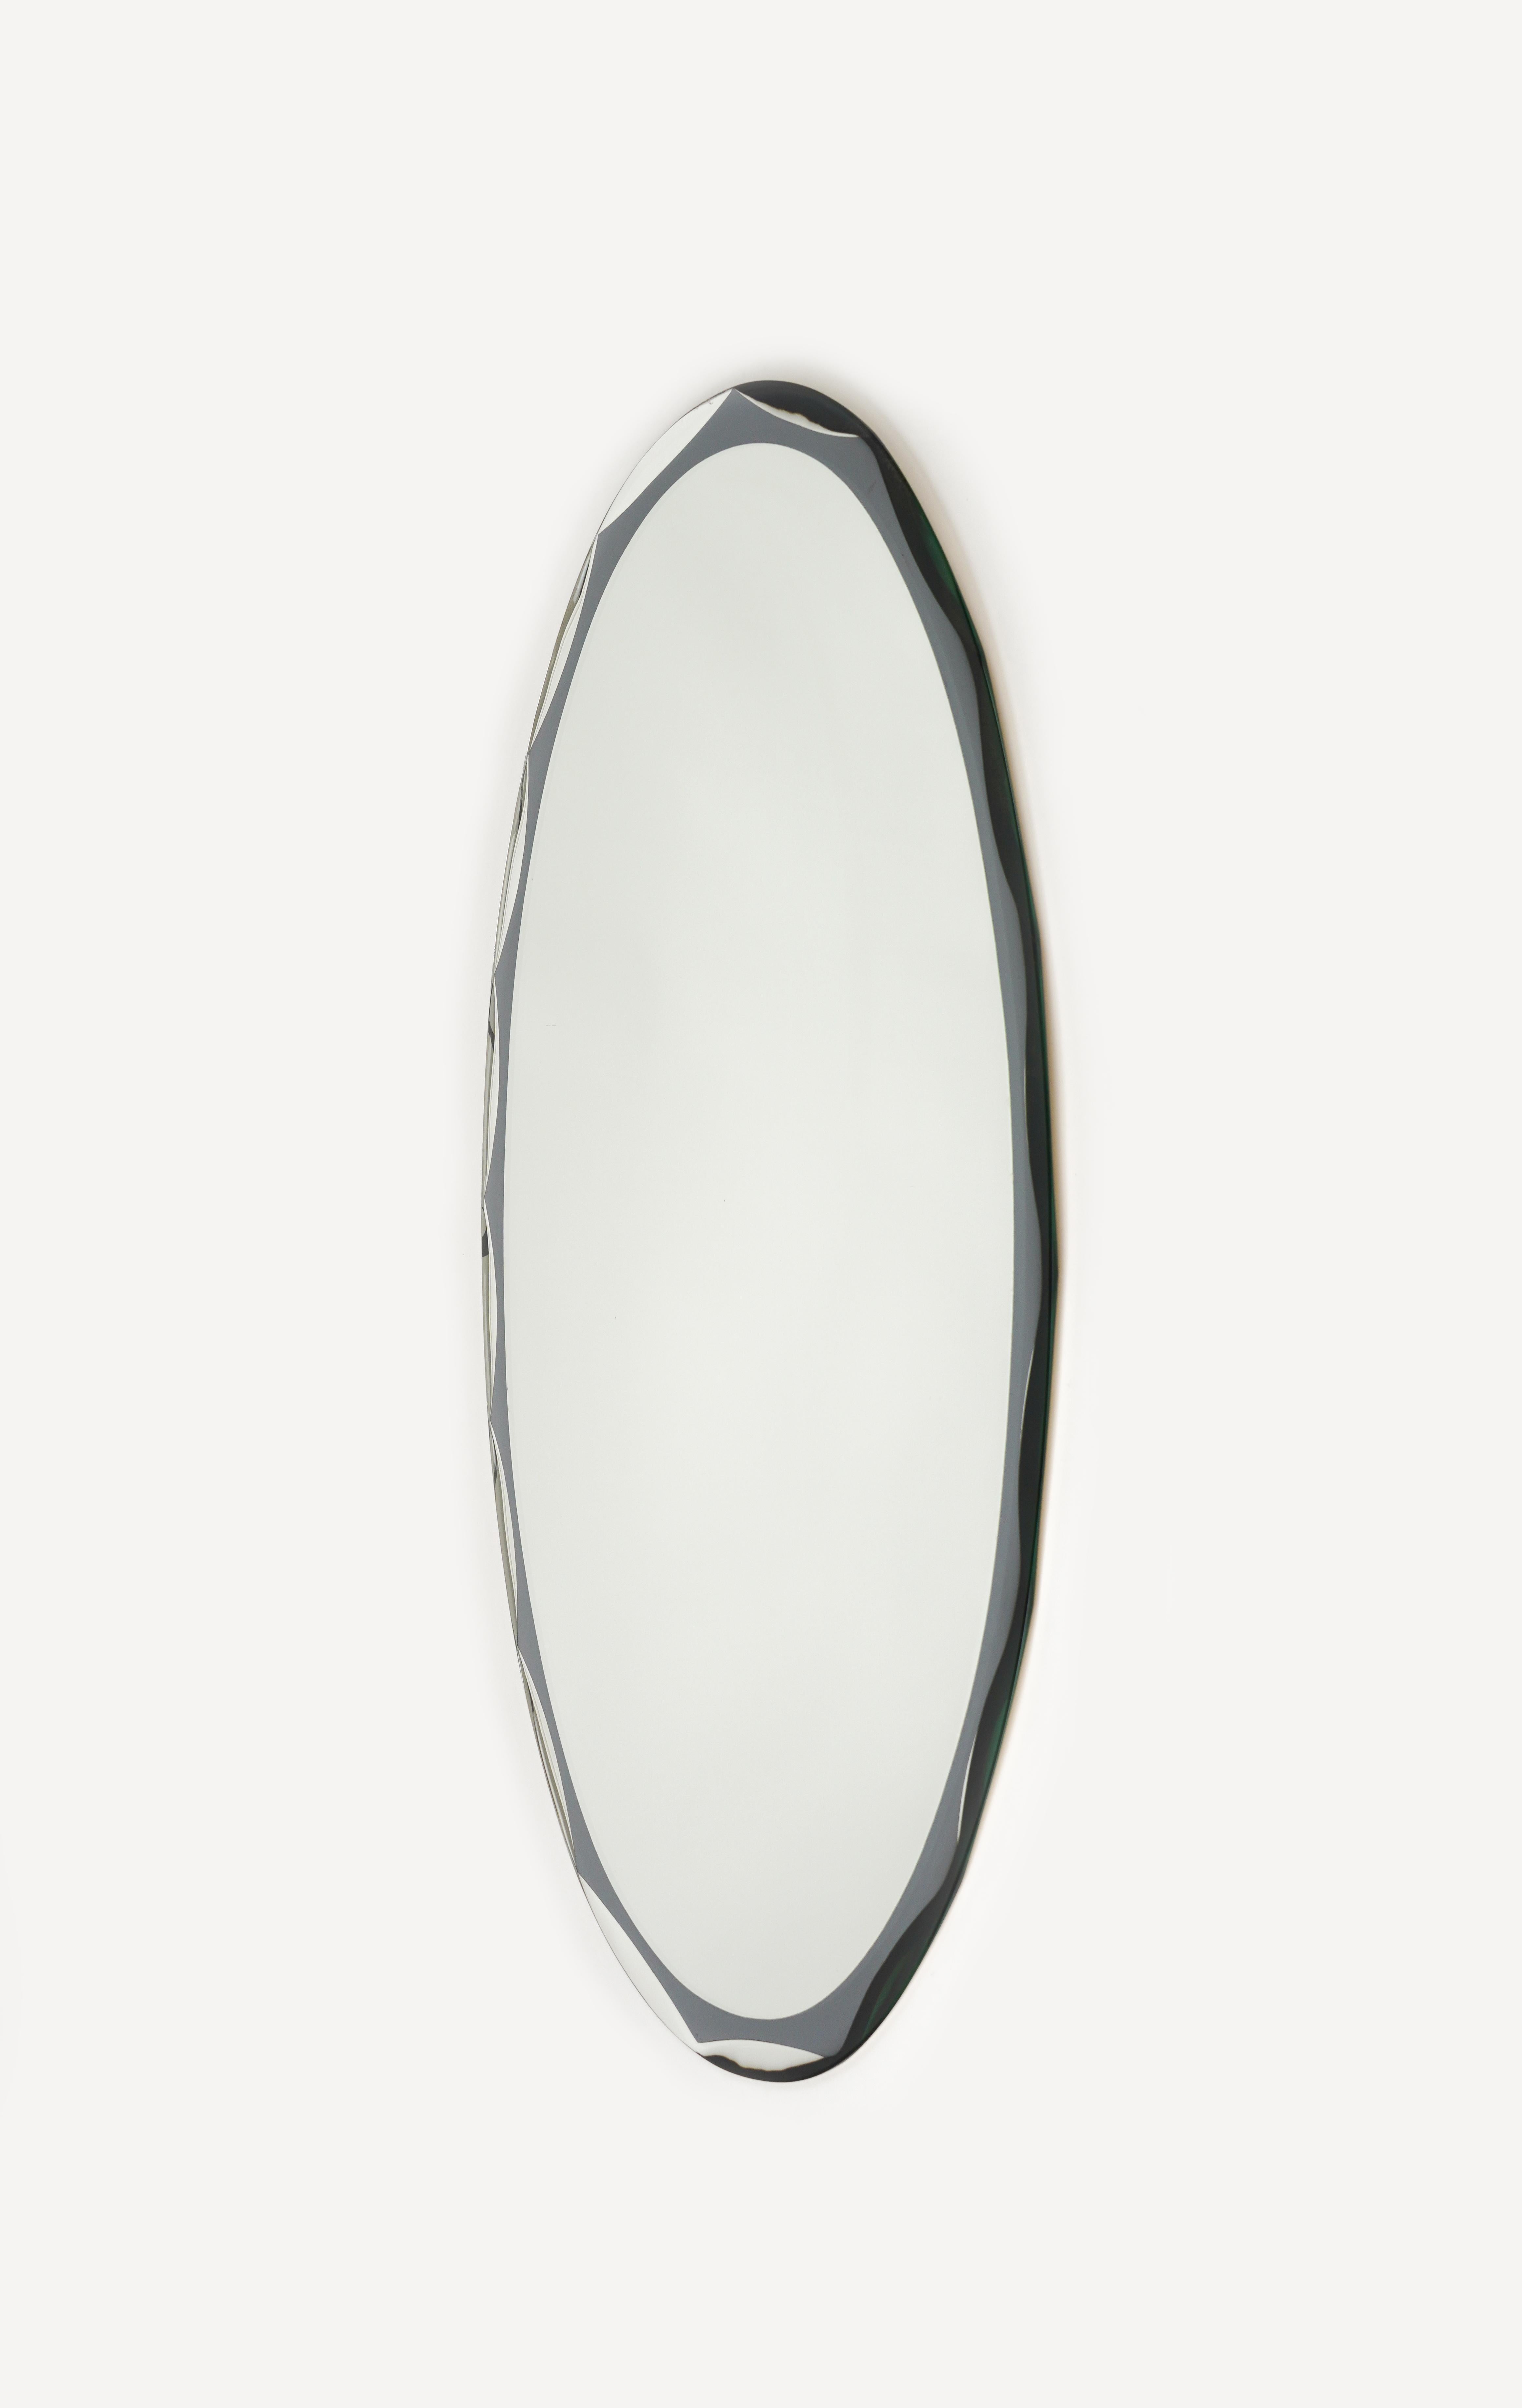 Midcentury Oval Wall Mirror Attributed to Metalvetro Galvorame, Italy 1970s For Sale 1